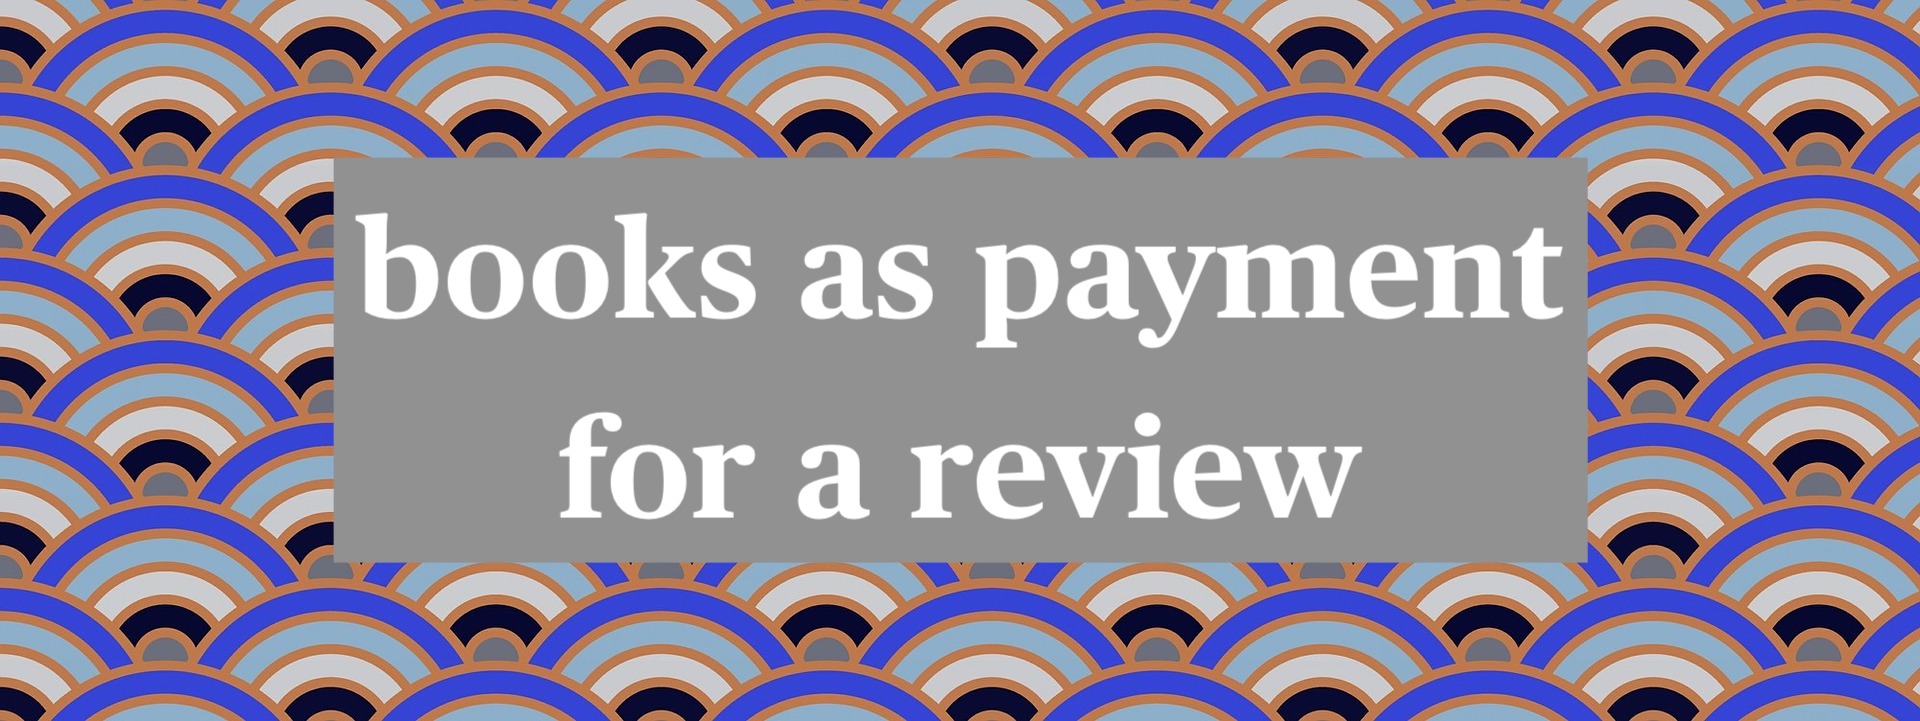 Image by Prawny from Pixabay "books as payment for review"